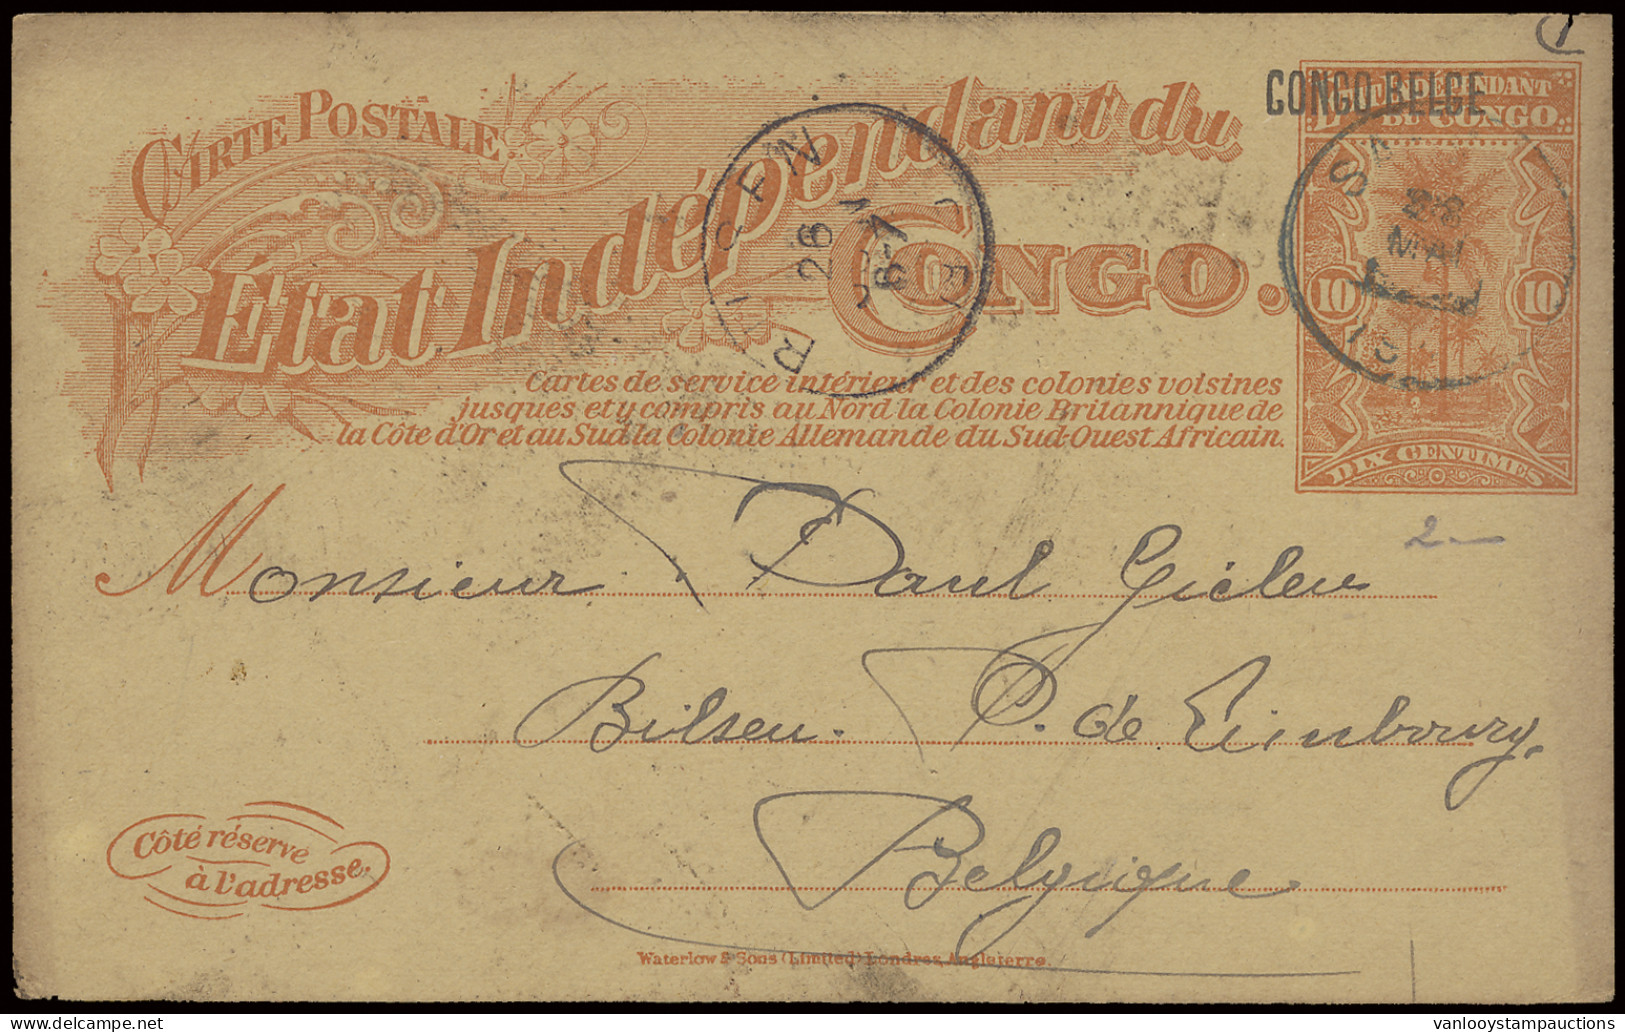 1910 Postal Stationery Catalogue Stibbe N° 24T-Cu, Overprint CONGO BELGE Misplaced To The Left, Sent From Sakania May 28 - Stamped Stationery